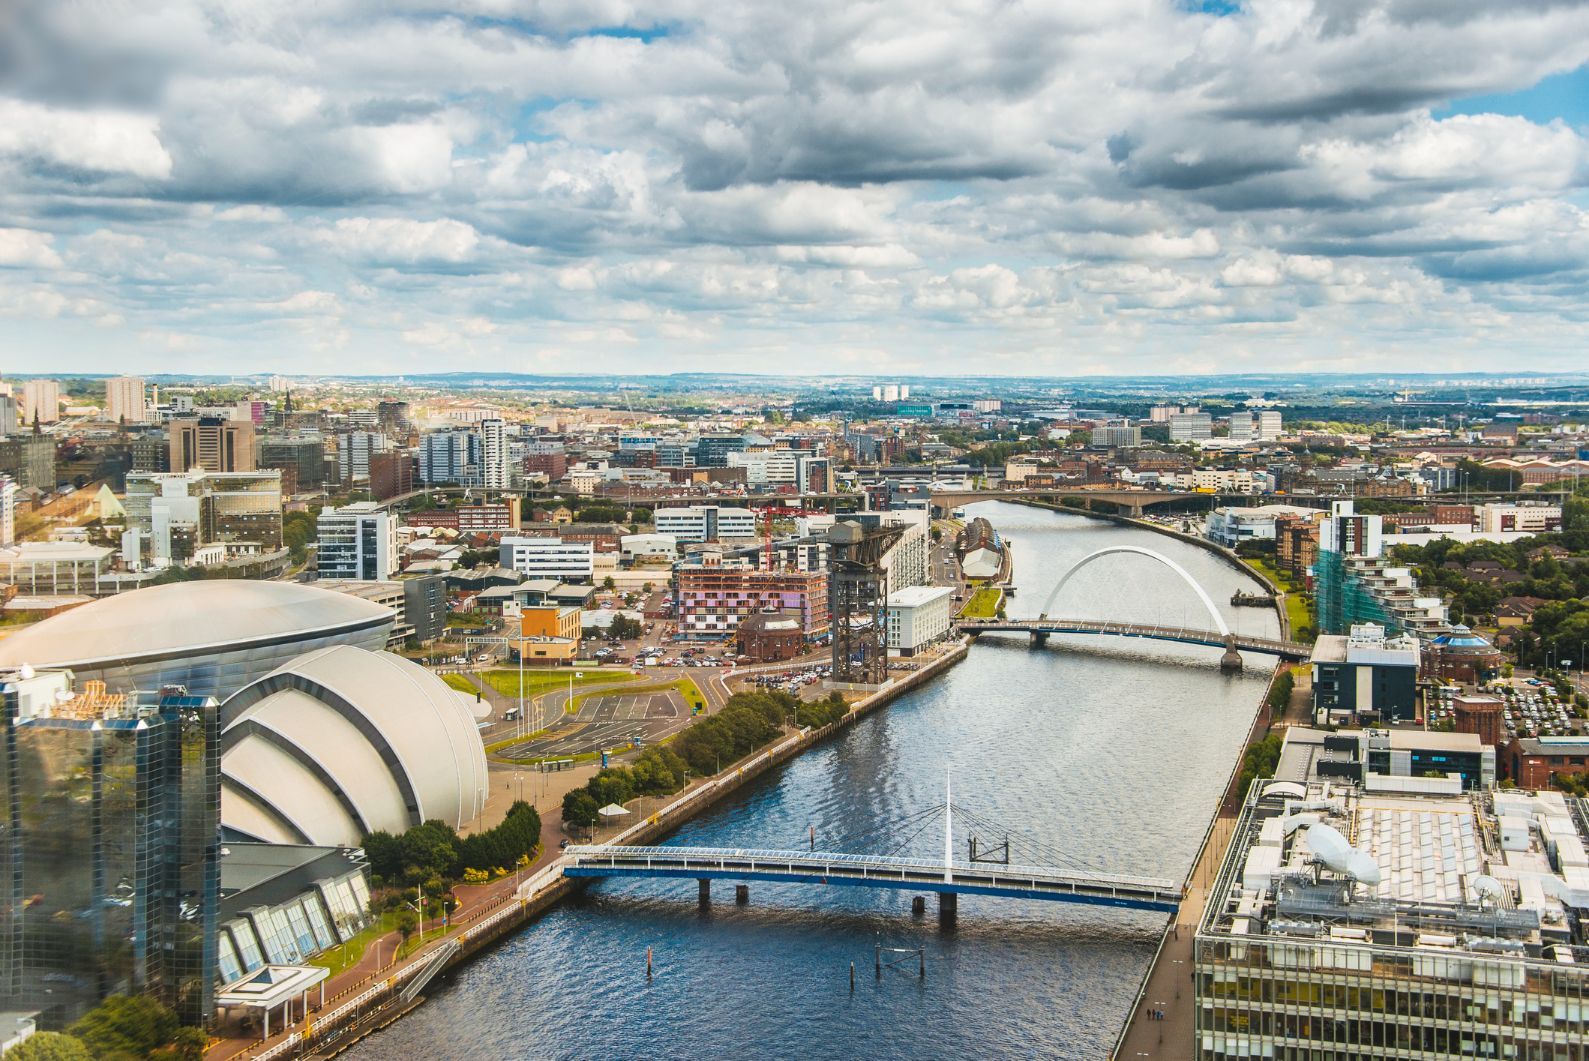 An aerial view of Glasgow, the largest city in Scotland and home to COP26.